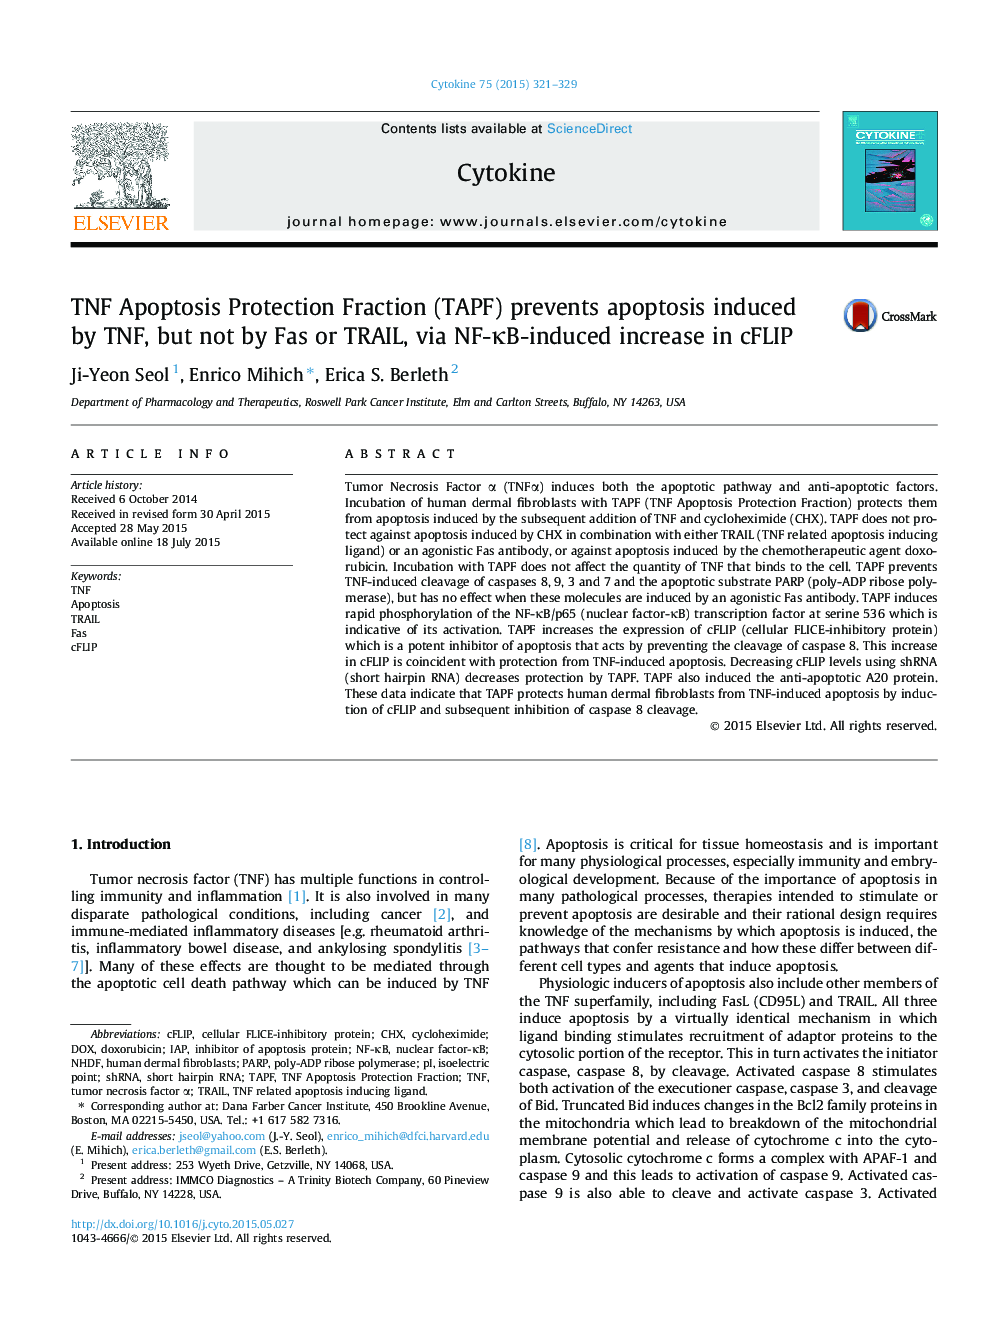 TNF Apoptosis Protection Fraction (TAPF) prevents apoptosis induced by TNF, but not by Fas or TRAIL, via NF-ÎºB-induced increase in cFLIP